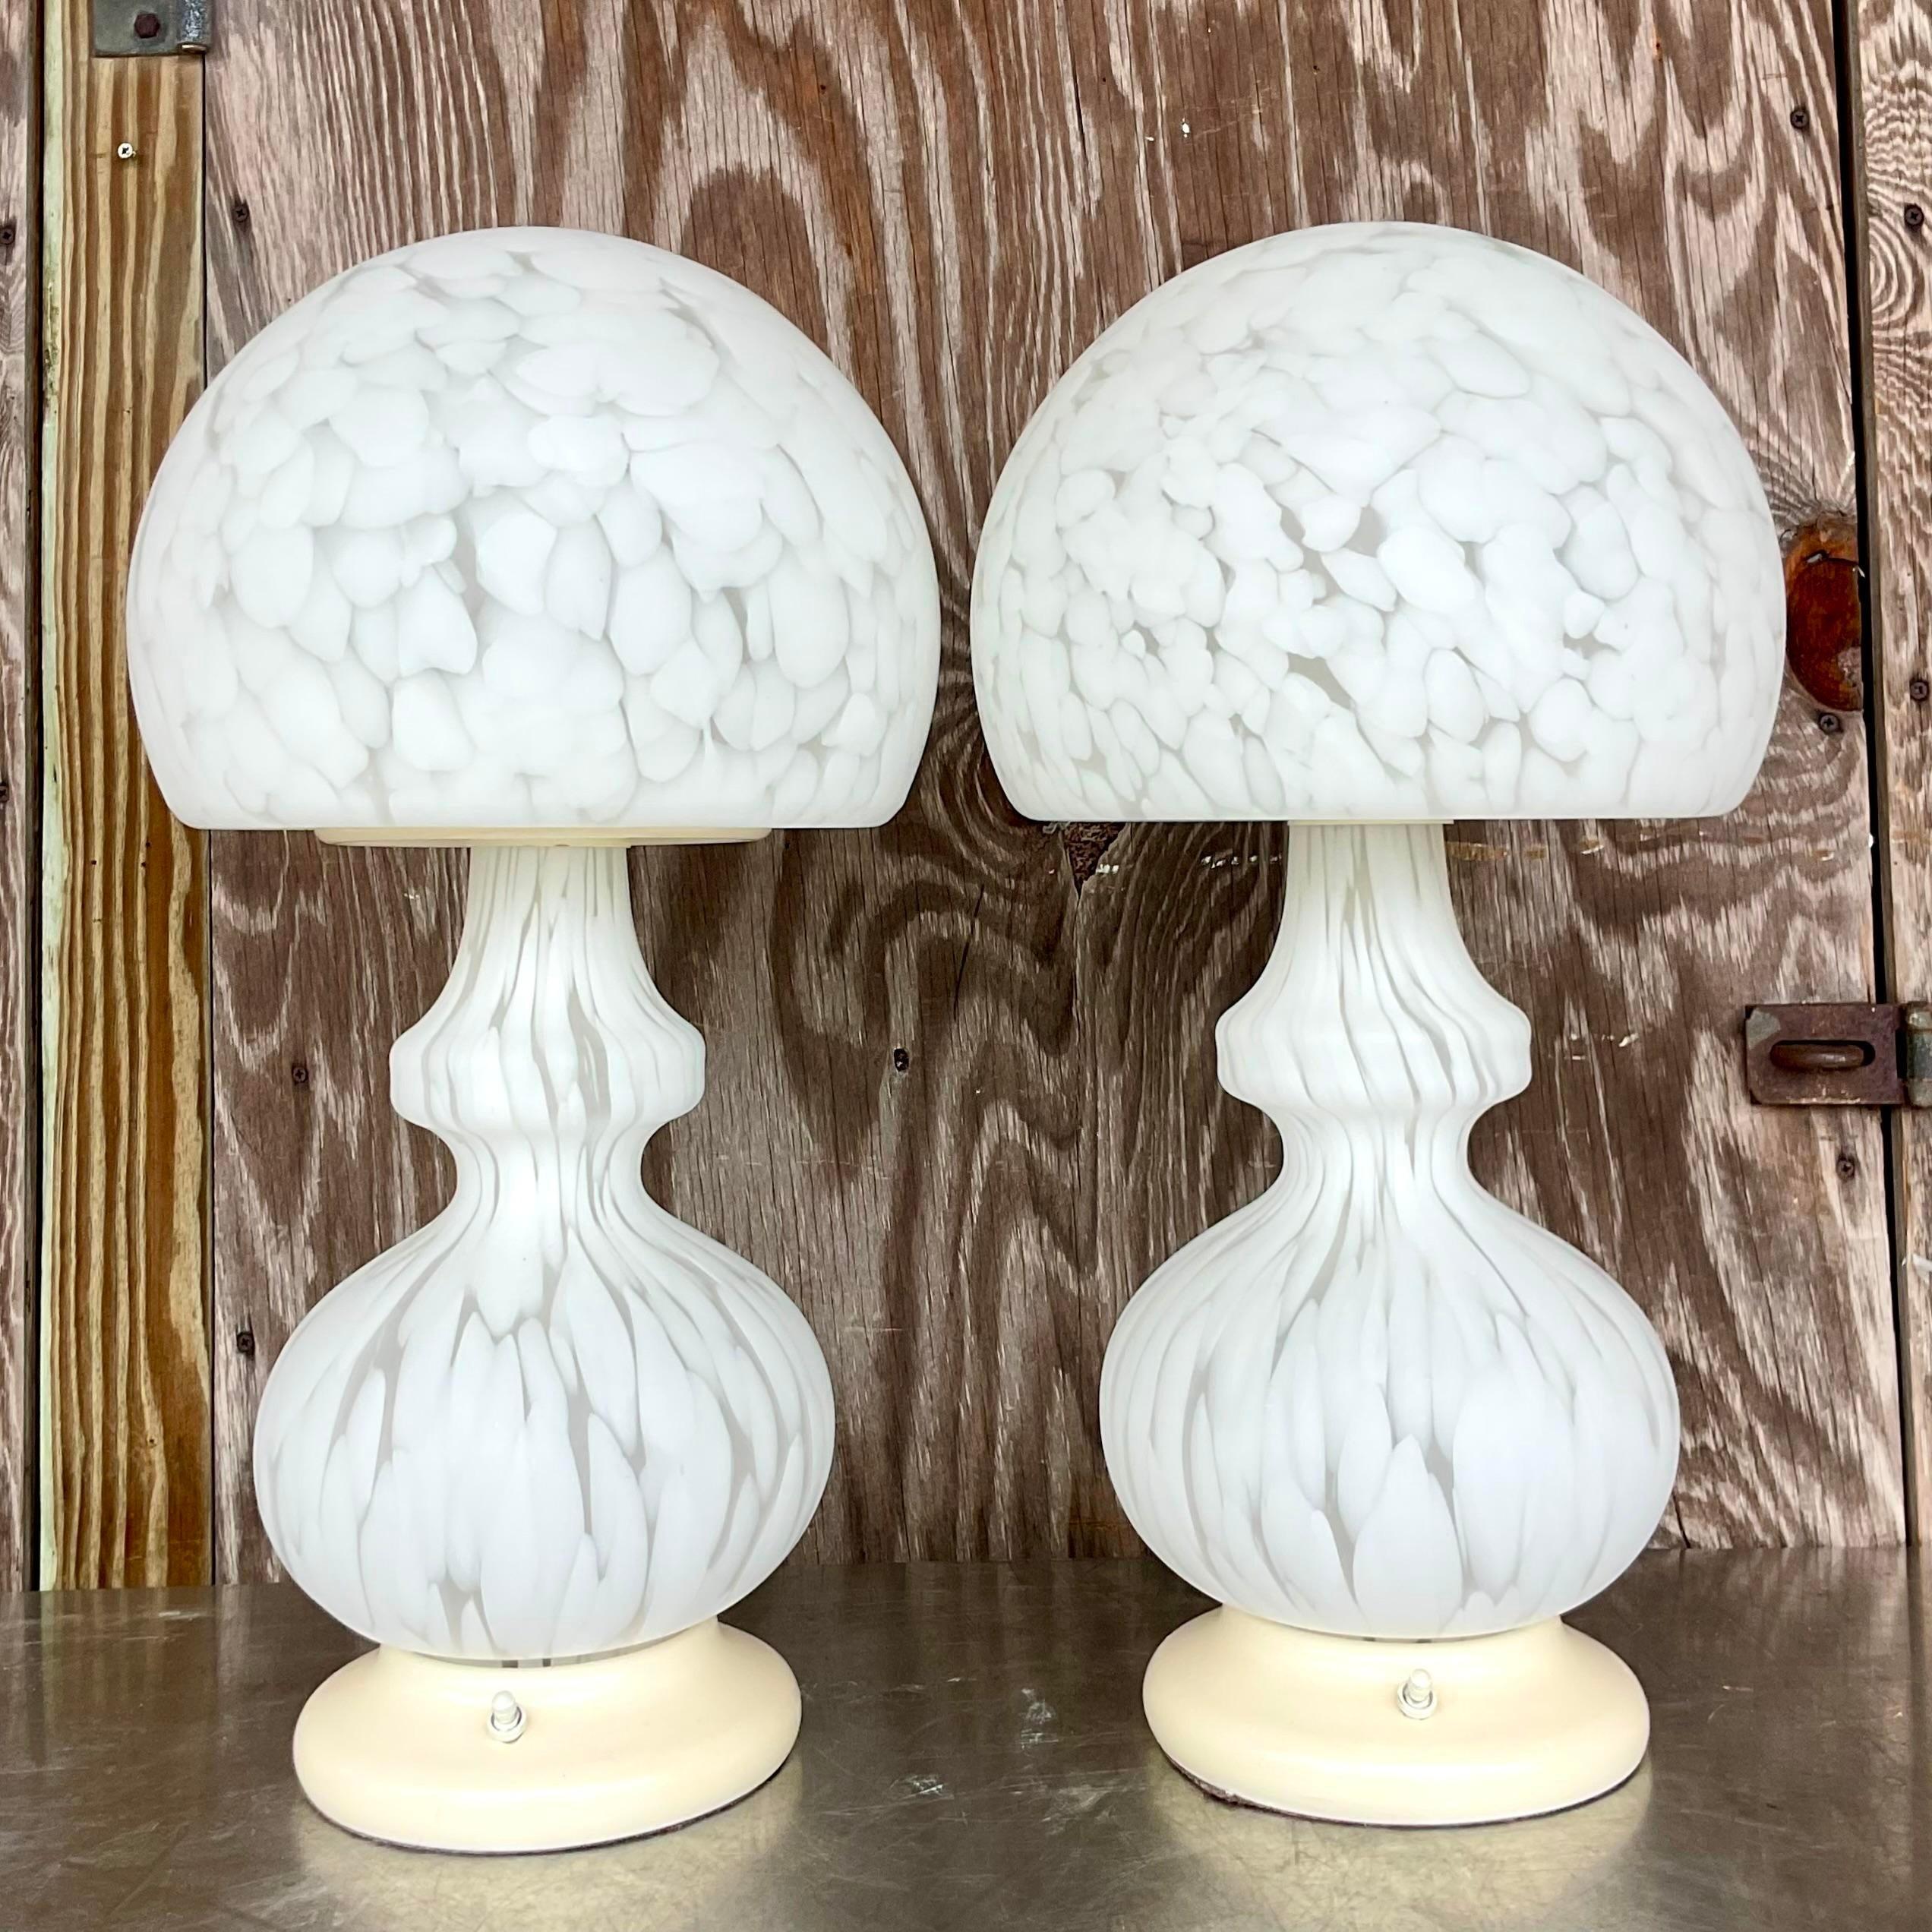 Italian Vintage Globe Lamps After Murano for Someroso for Laurel Lighting - a Pair For Sale